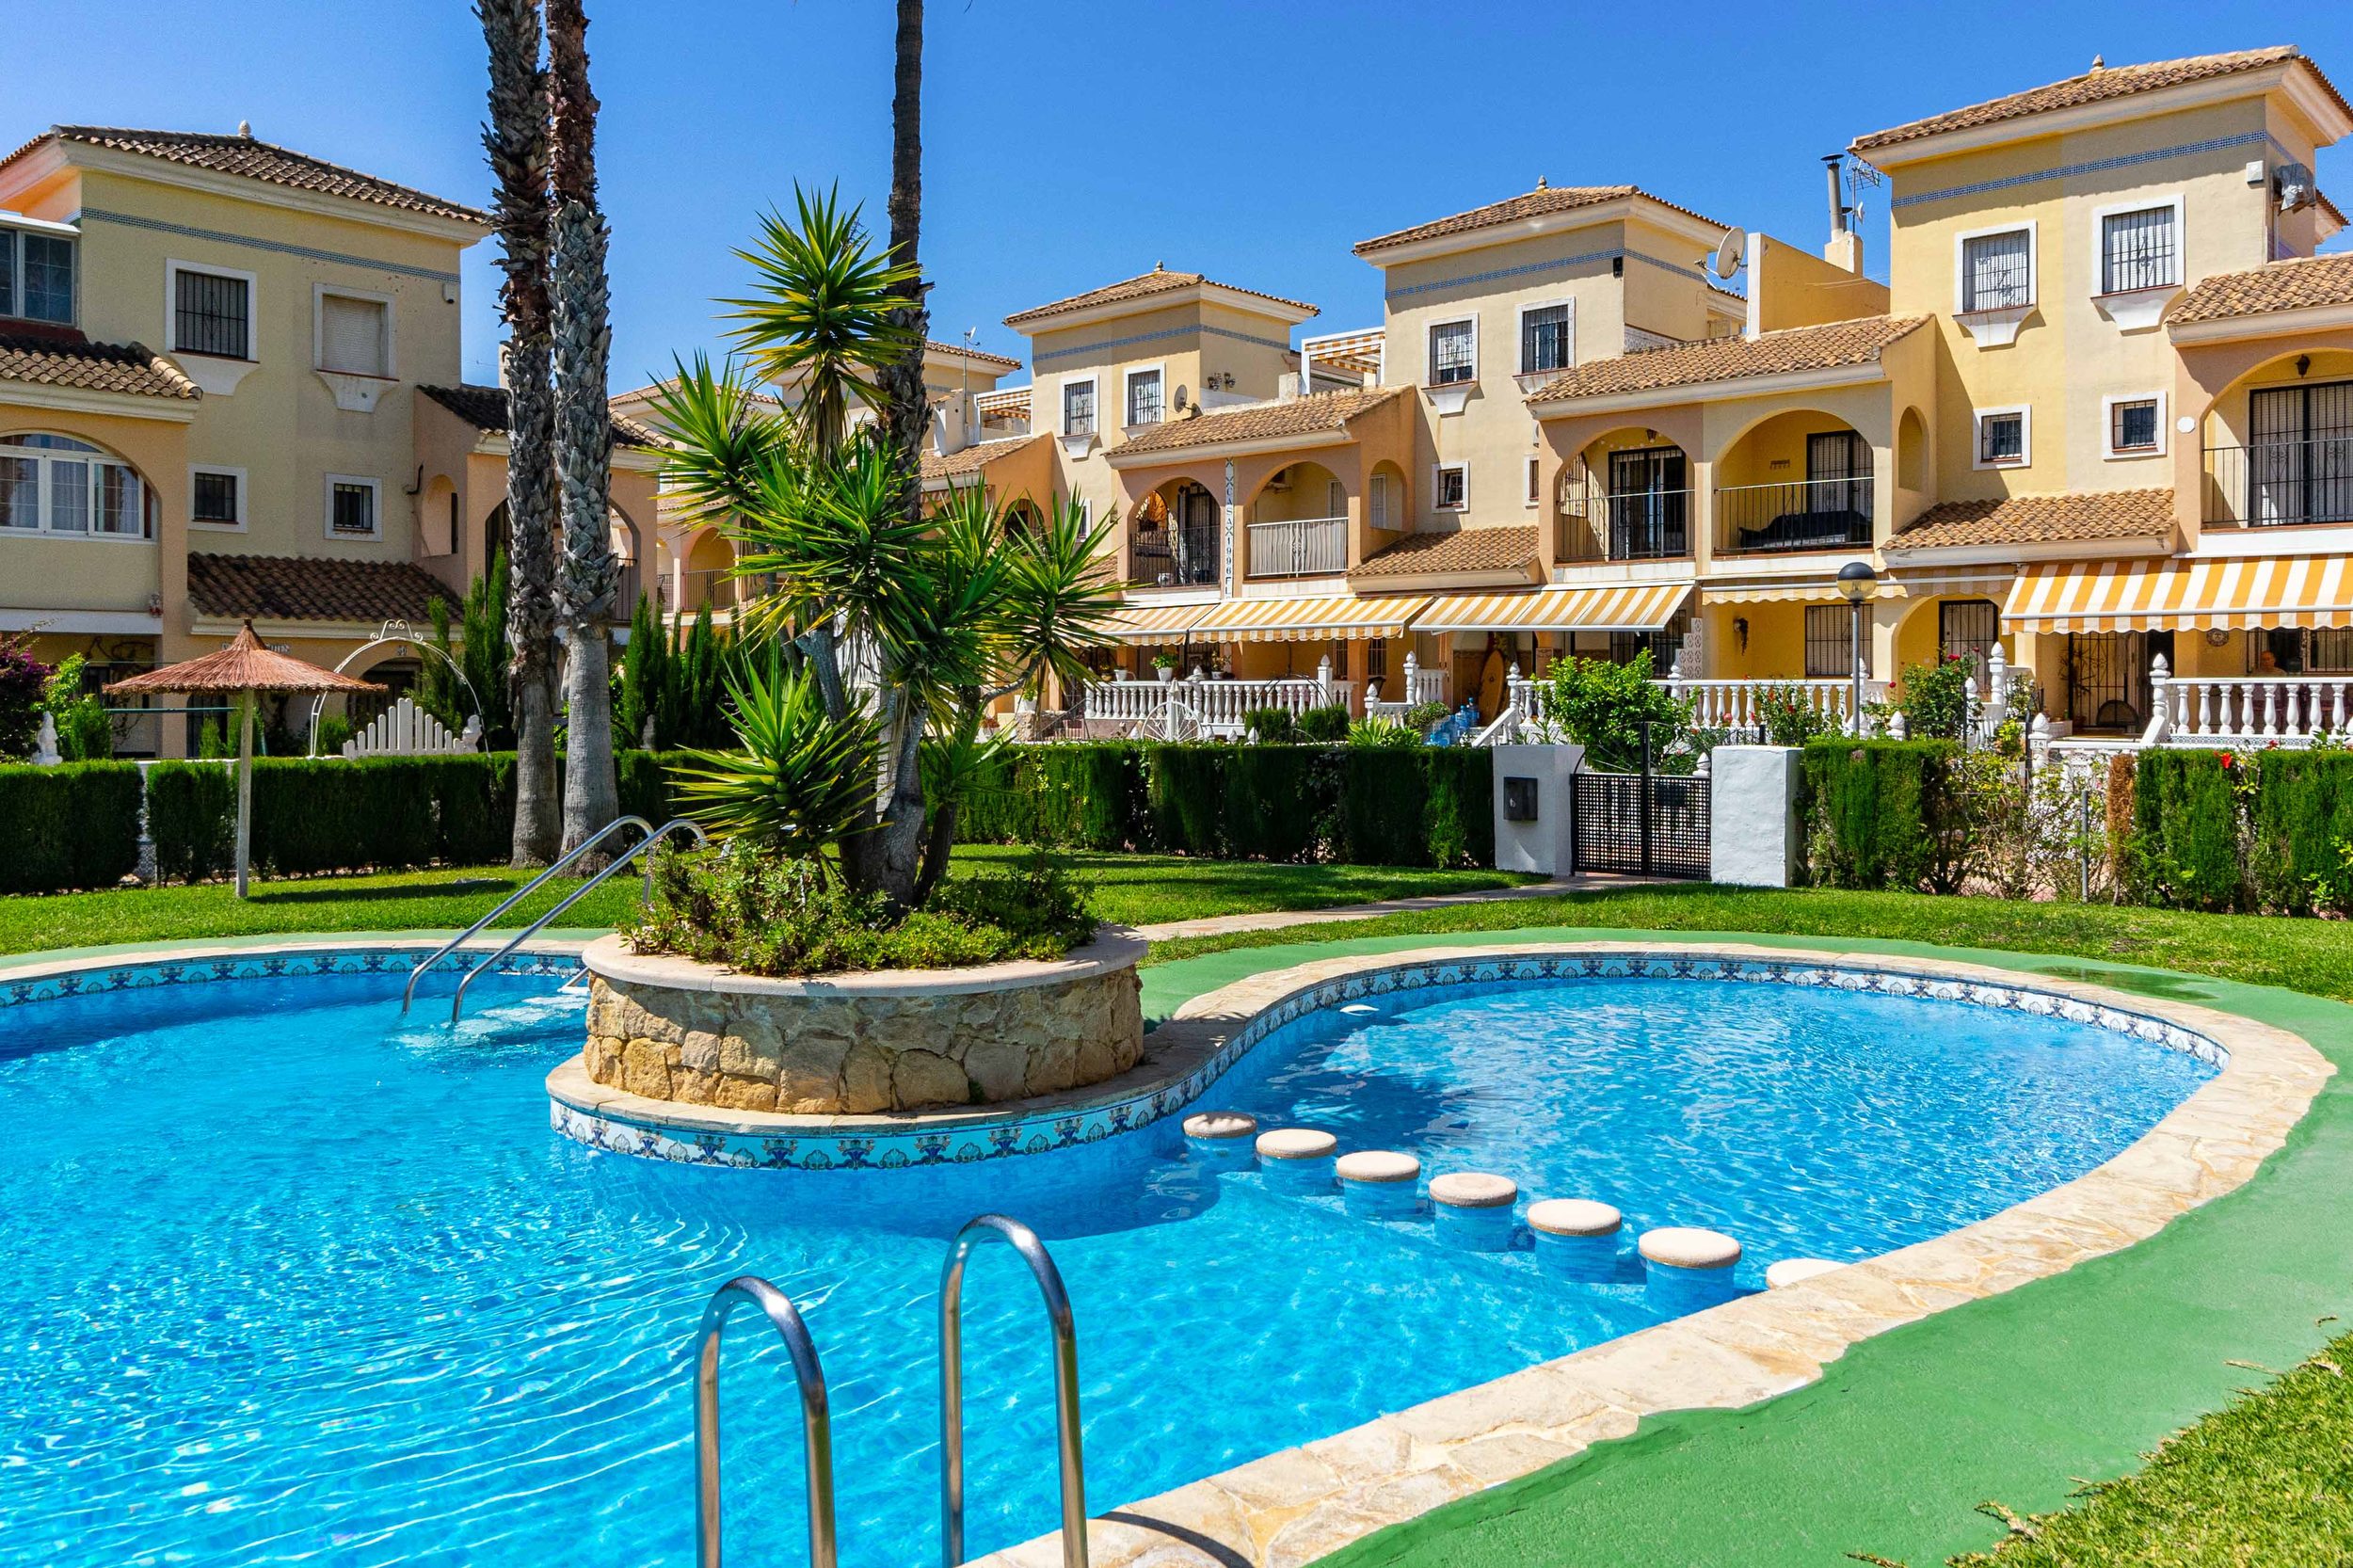 REF 3405-03874. Townhouse close to Orihuela Costa beaches and services.